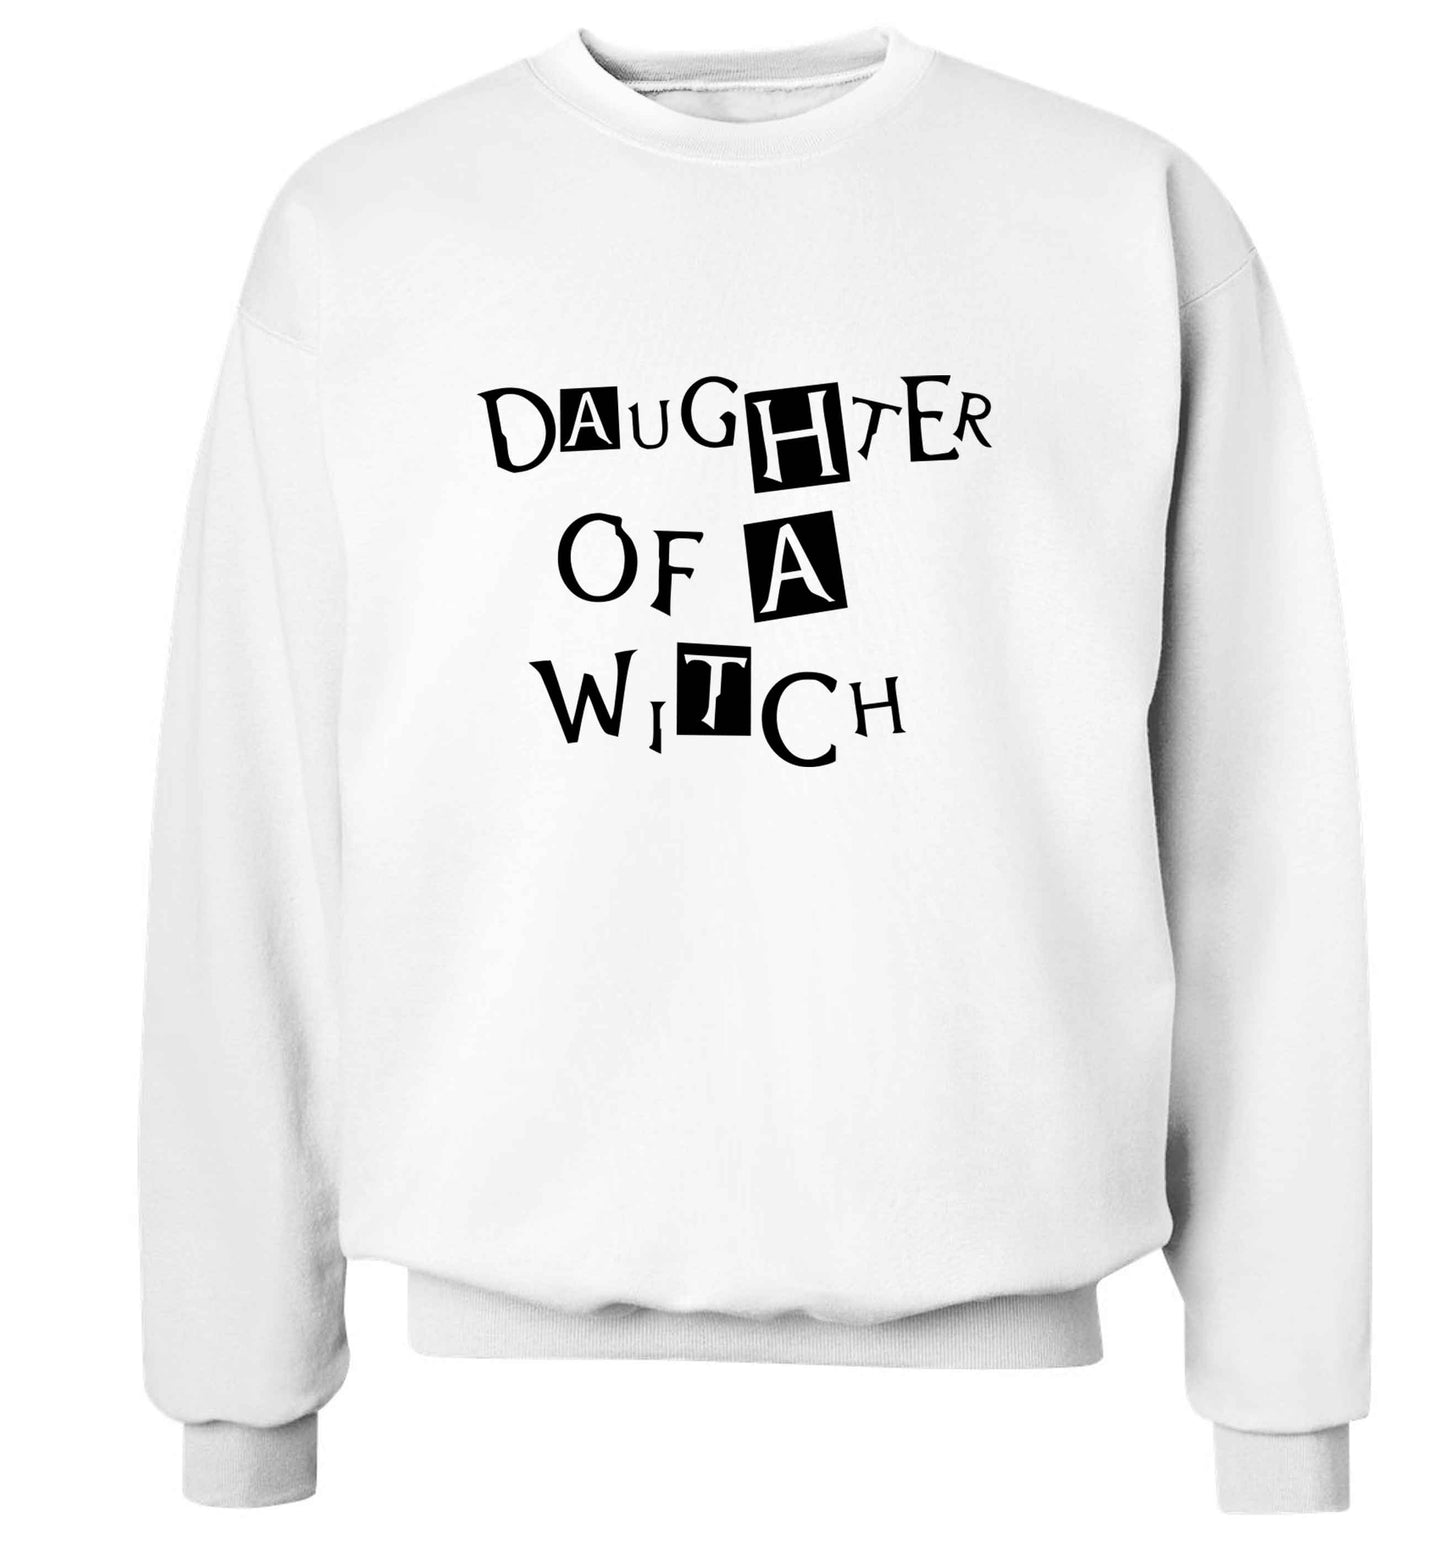 Daughter of a witch adult's unisex white sweater 2XL